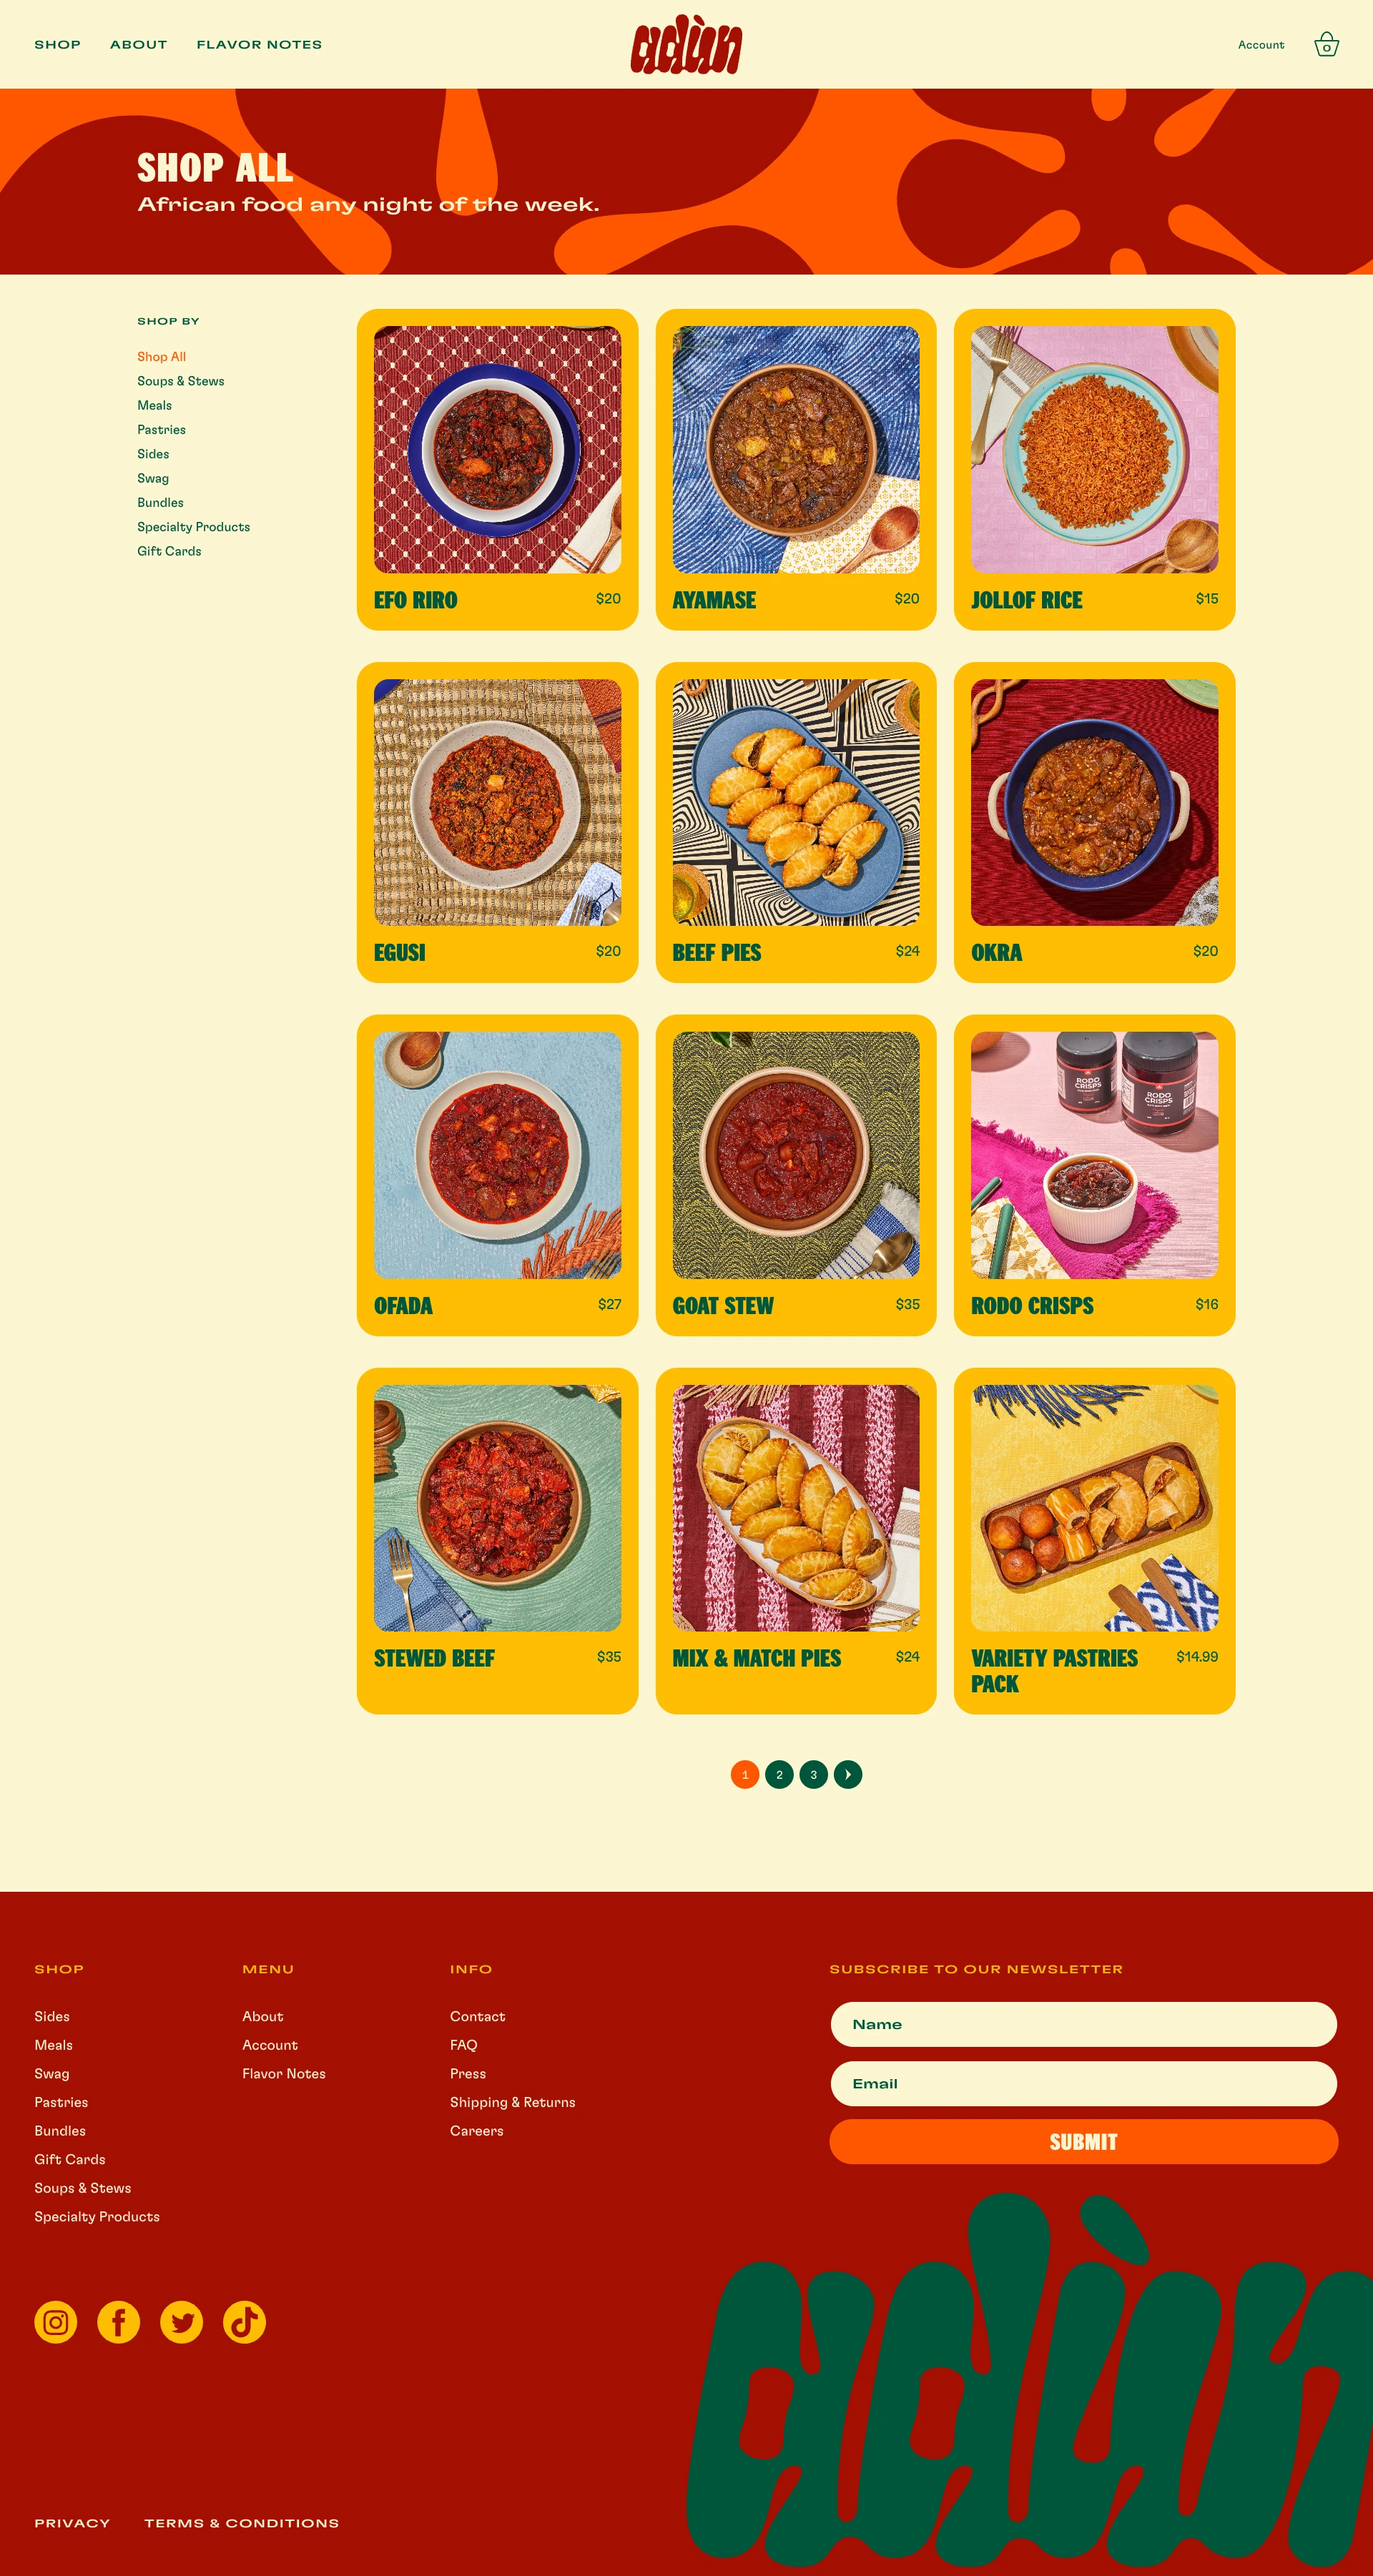 Adùn Landing Page Example: Adùn brings African flavors from our kitchen to your table. Classic Recipes and Fresh Takes, Made for You. Try our ready-in-minutes frozen meals.